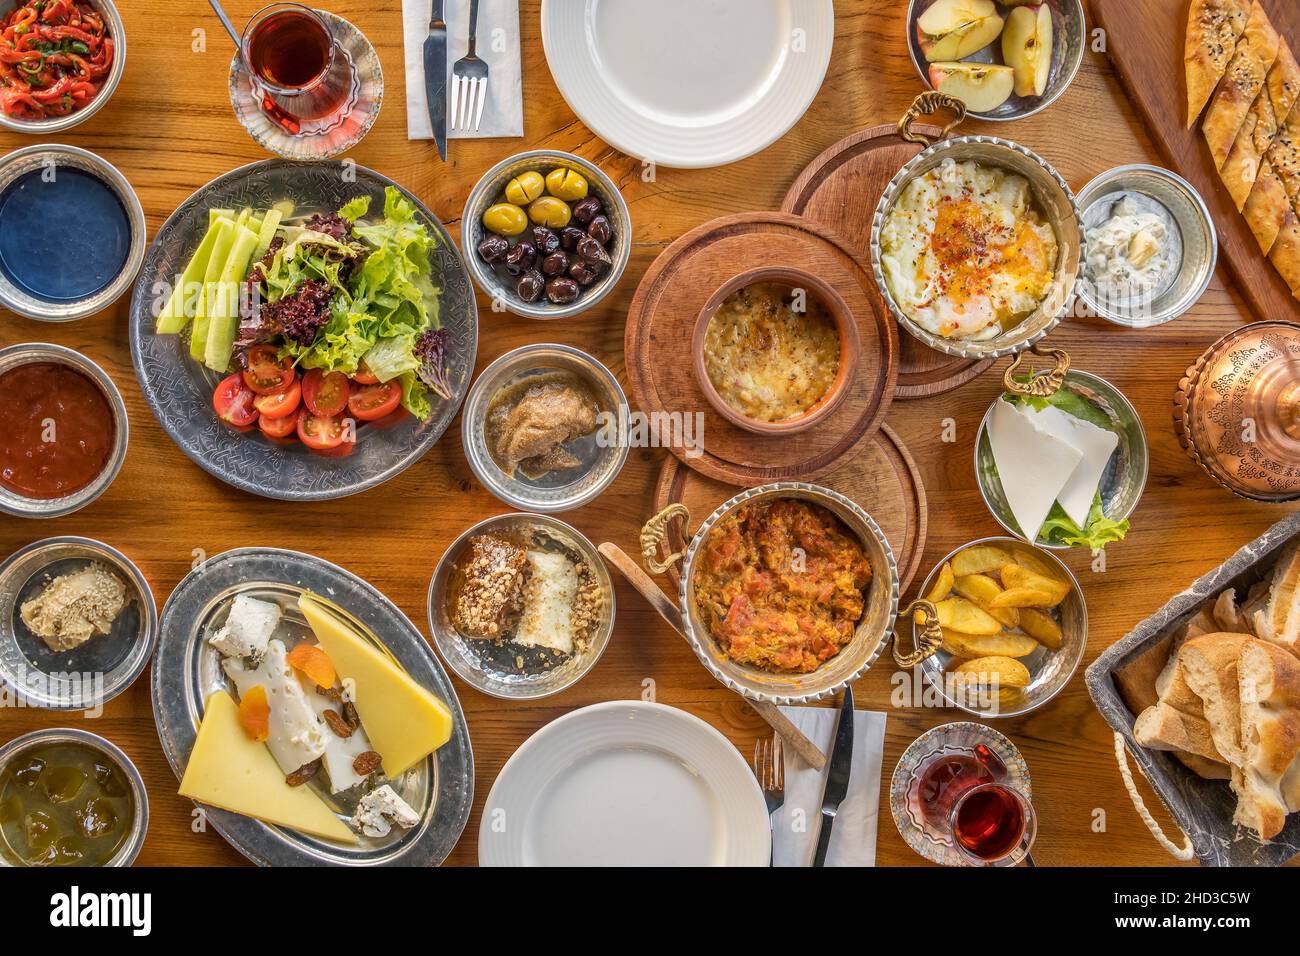 Traditional rich Turkish village breakfast on the wooden table Stock Photo